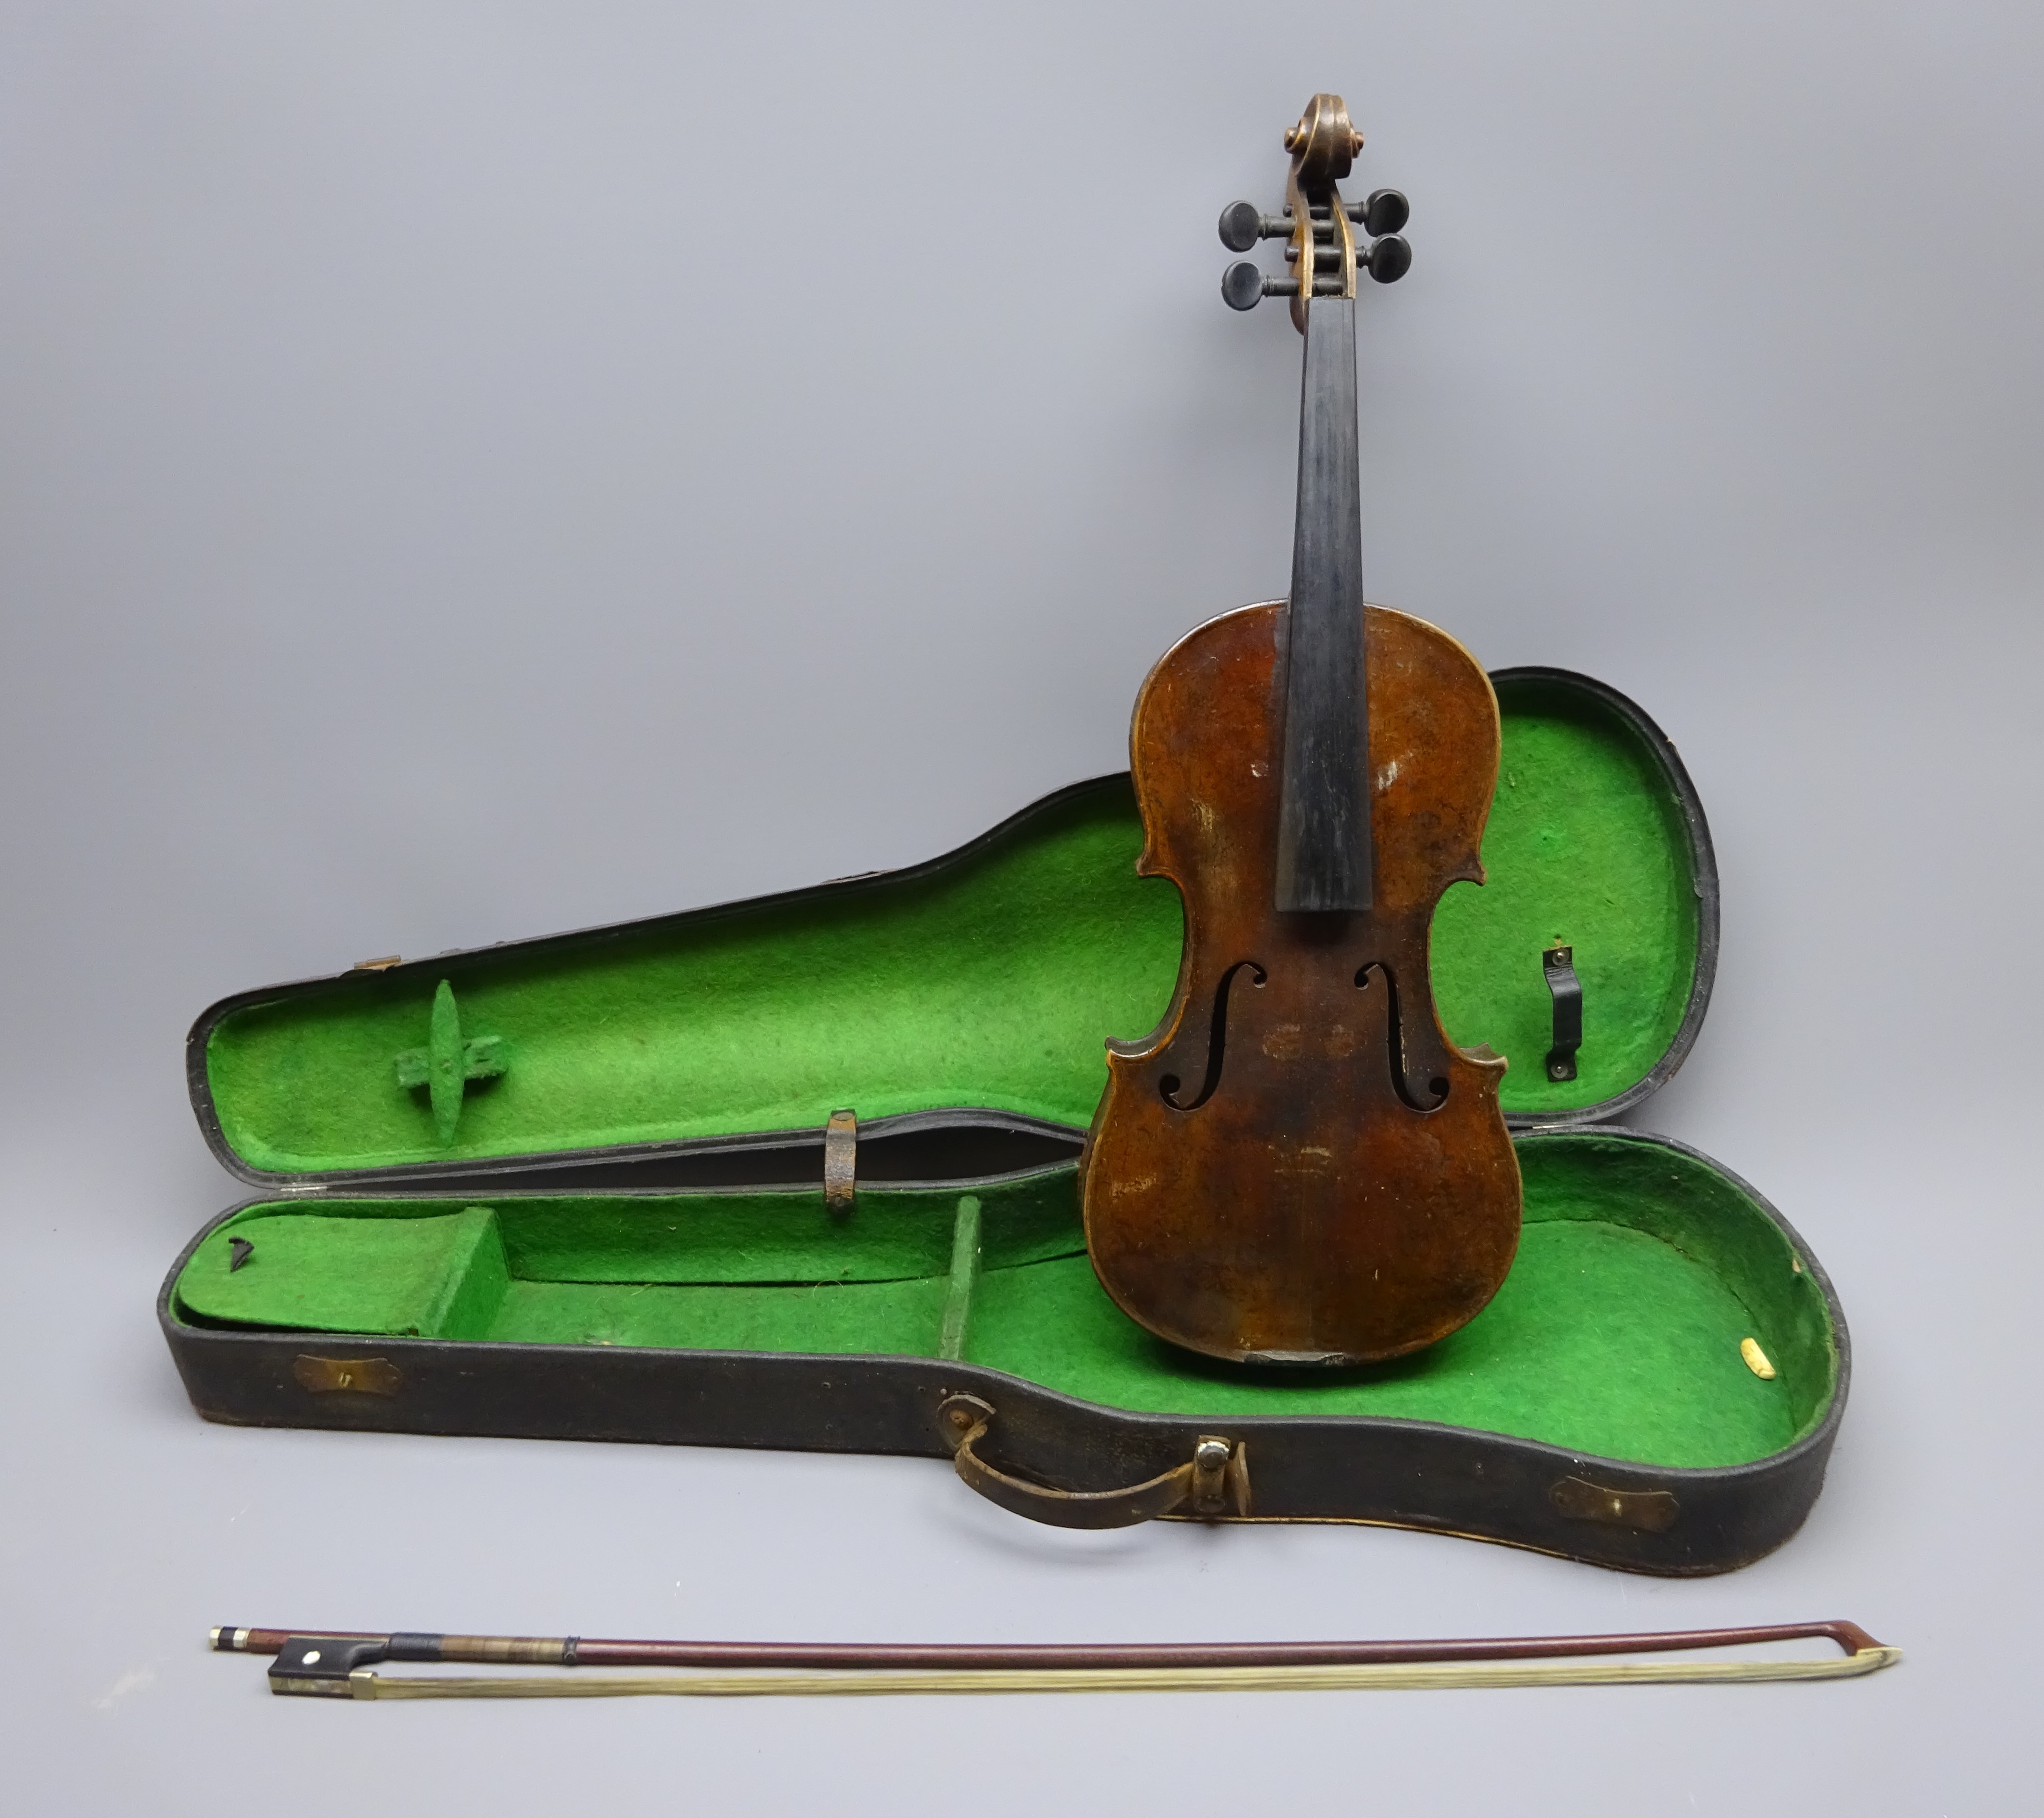 Late 19th century German violin with 36cm two-piece maple back and ribs and spruce top,